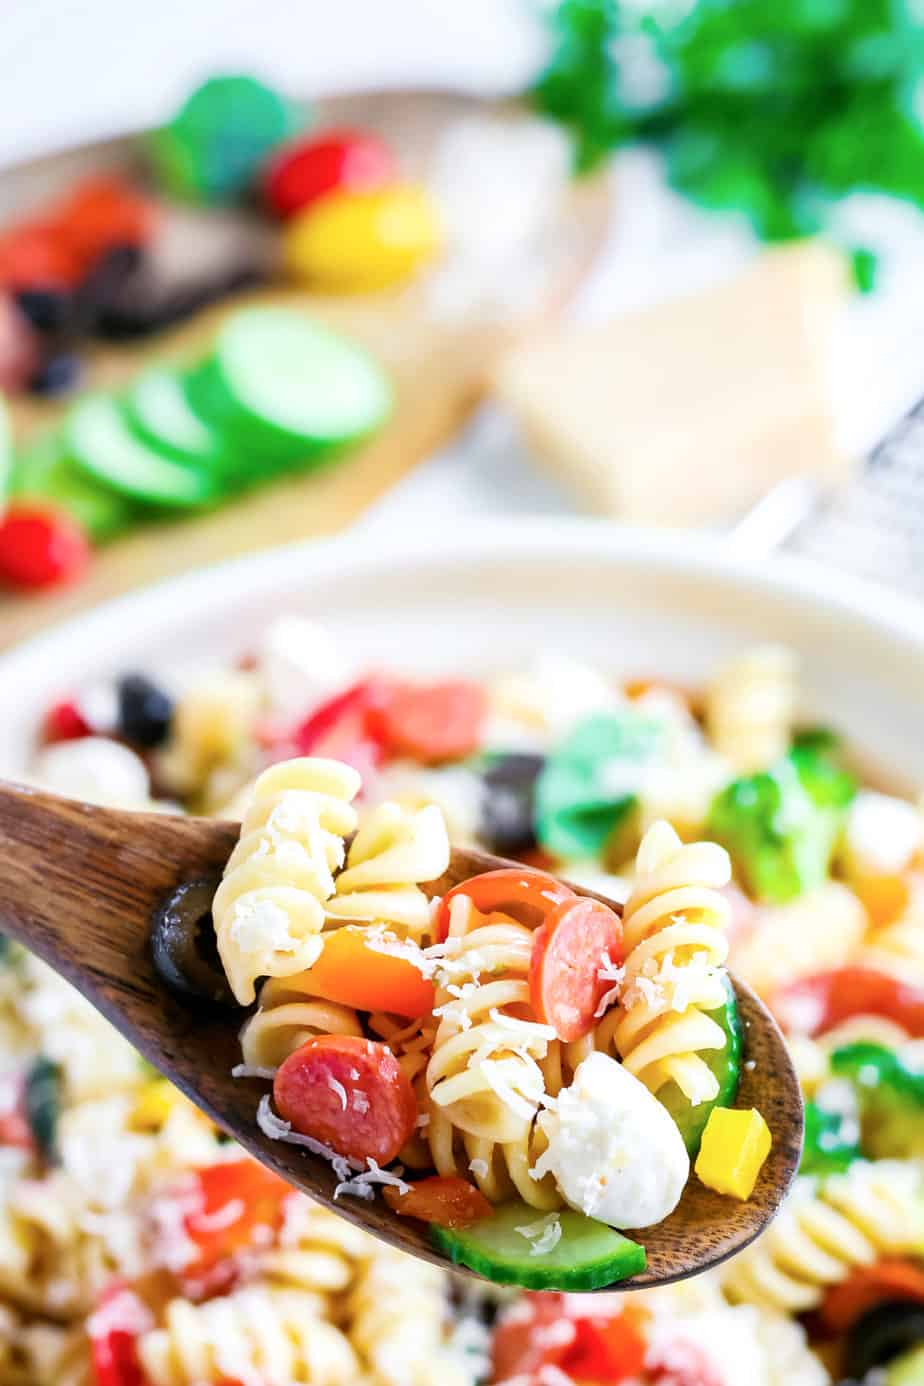 Italian pasta salad being scooped from the bowl with a wooden spoon close up.